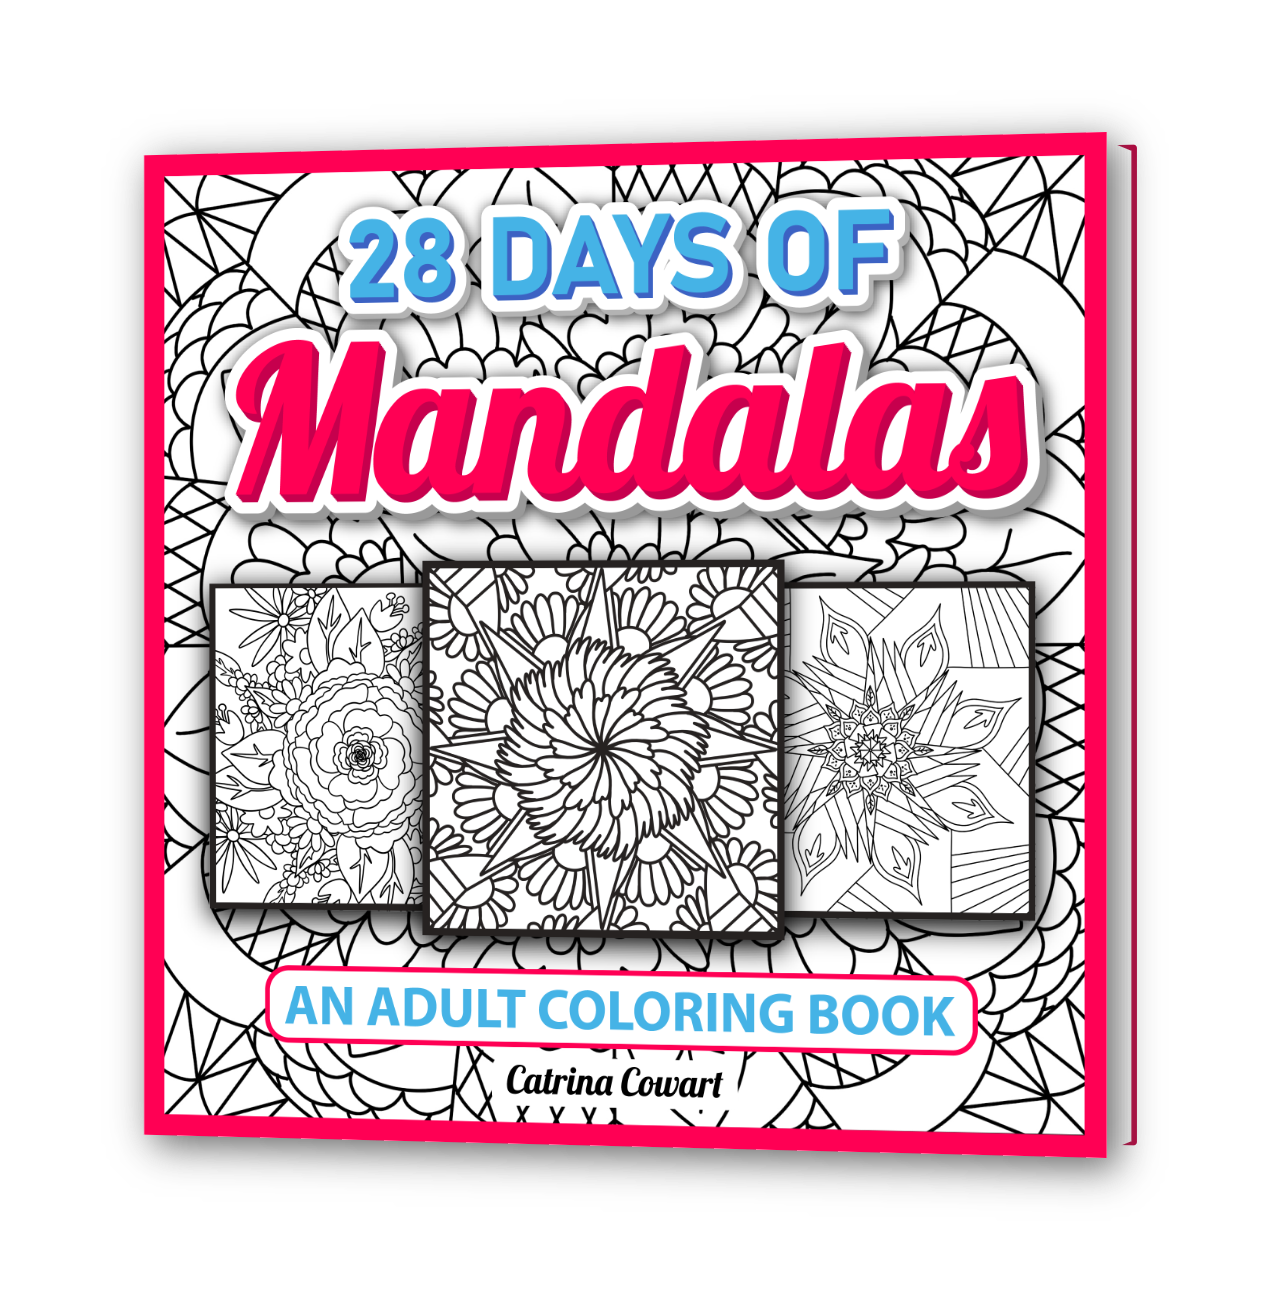 Mindfulness Coloring for Adult Relaxation: Abstract Coloring Books for Adult  Color Therapy (Paperback)